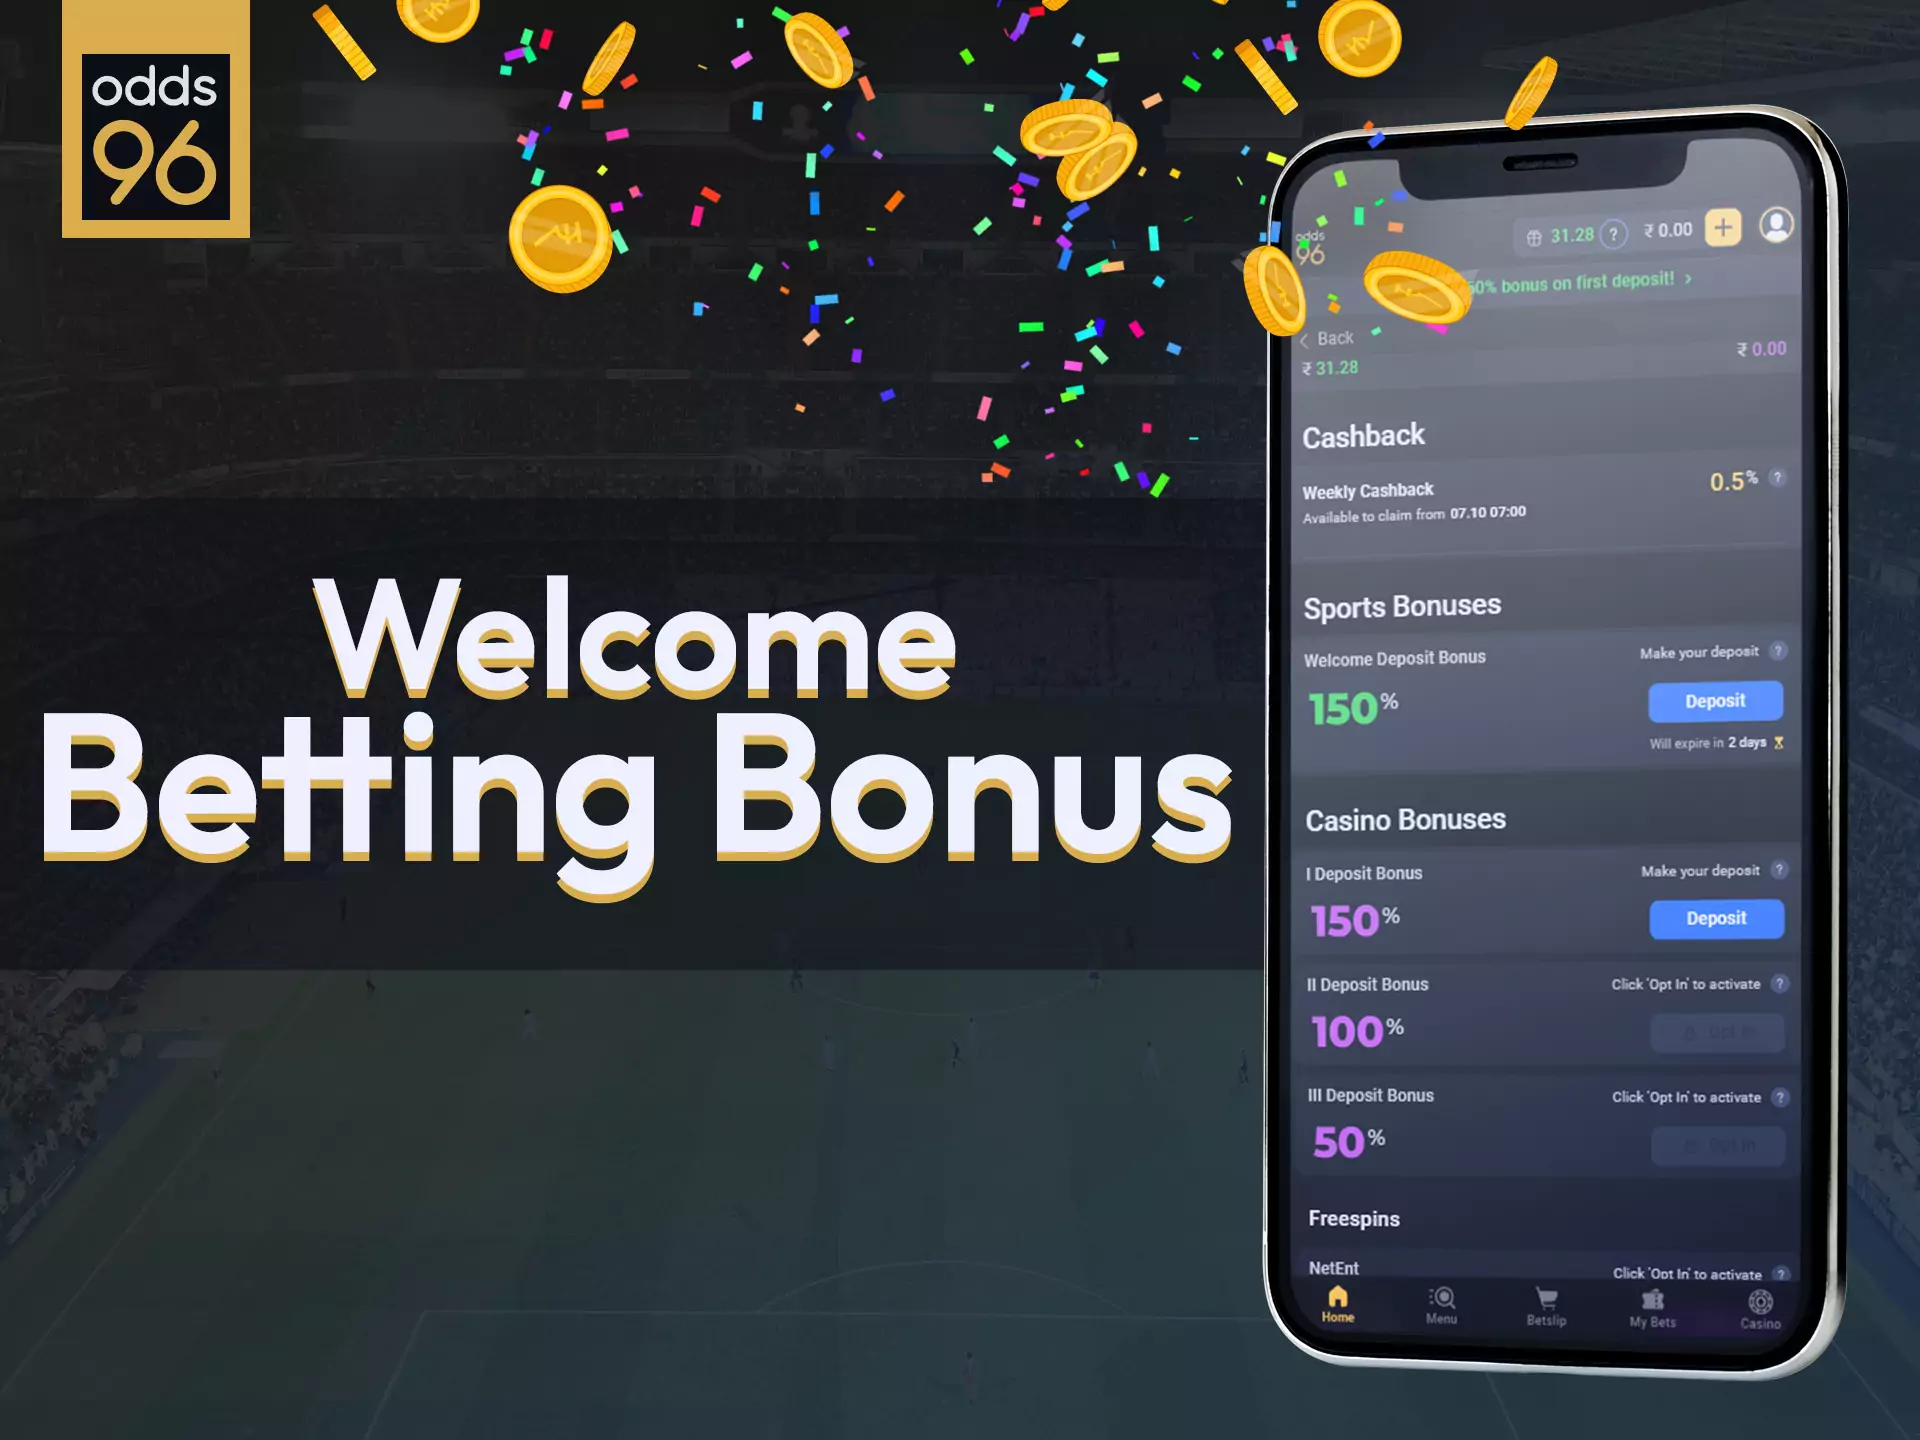 Get a special welcome bonus for betting in Odds96.